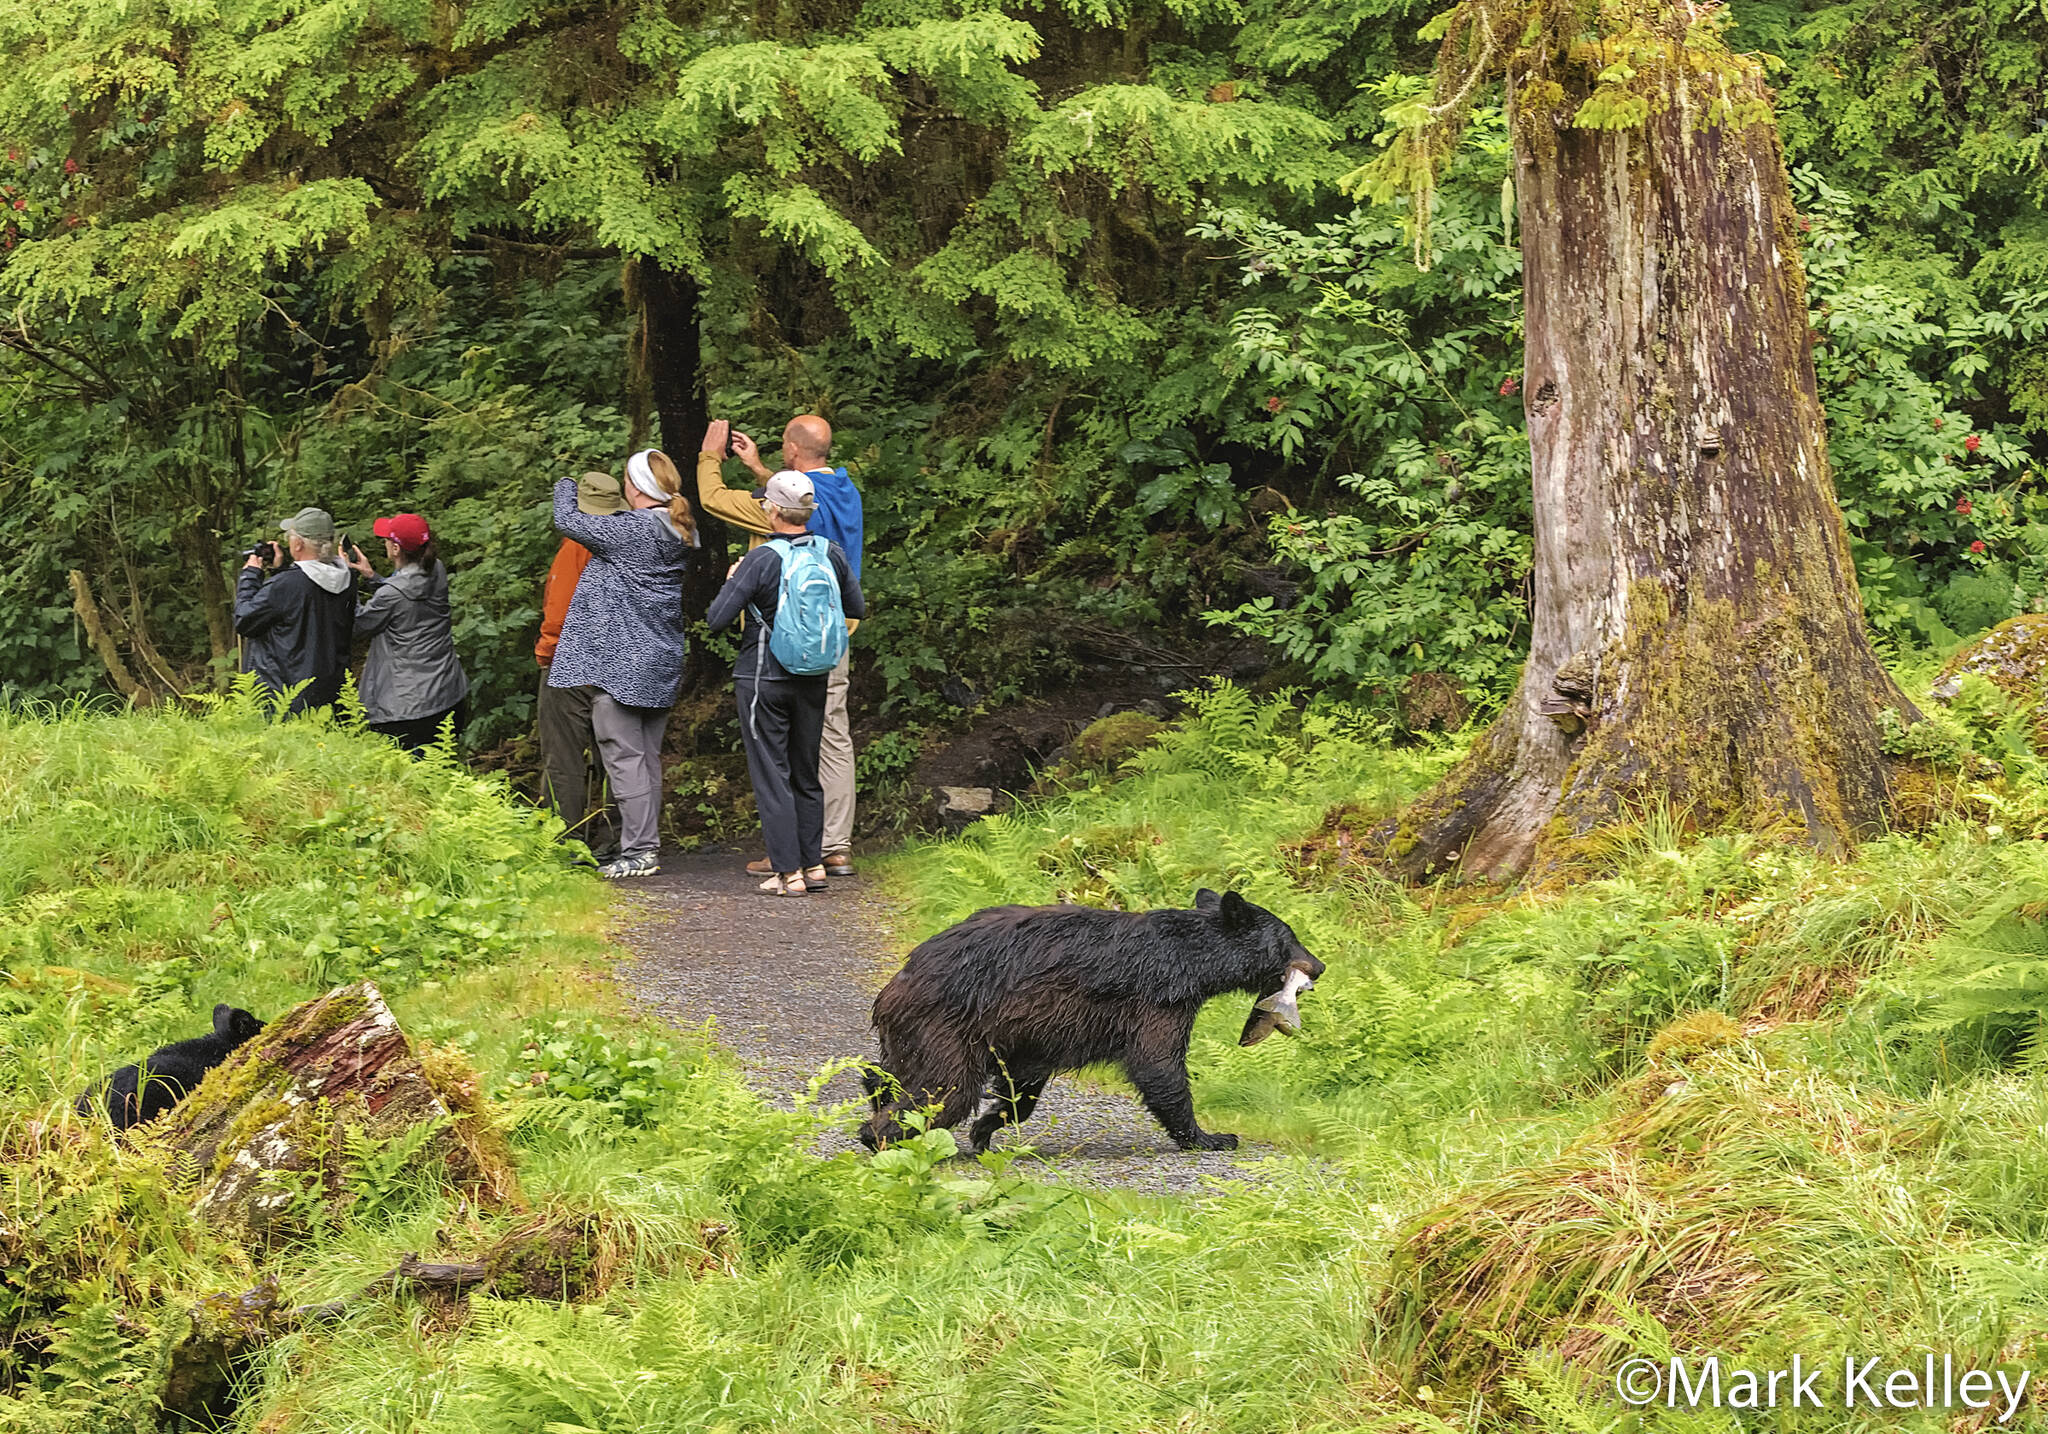 This photo was one of the 10 photos a part of Juneau-based photographer Mark Kelley’s award-winning portfolio featured in the 2022 National Wildlife Magazine photo contest. The photo depicts black bear carrying a salmon behind the backs of visitors to the Tongass National Forest along Anan Creek. (Courtesy / Mark Kelley)